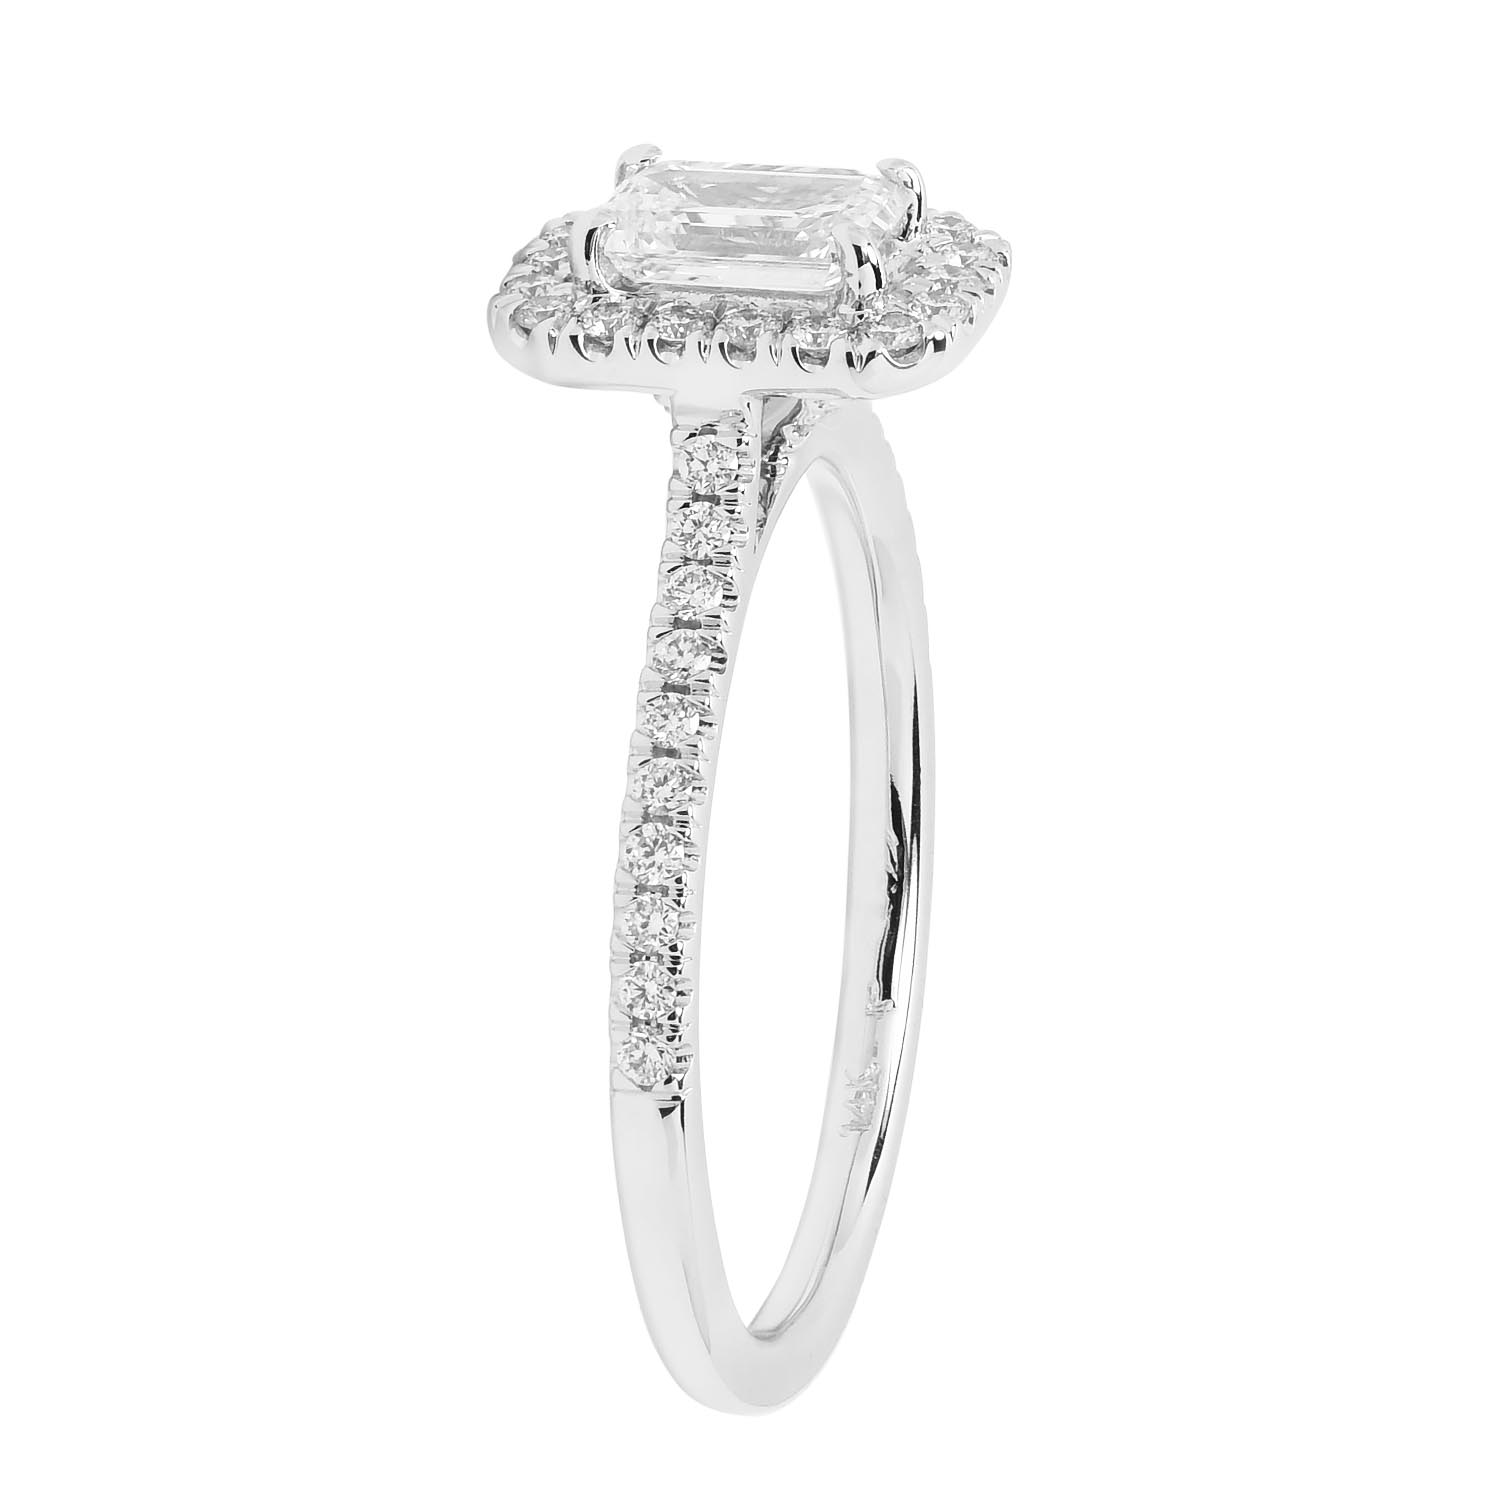 Martin Flyer Emerald Cut Diamond Halo Engagement Ring in 14kt White Gold (3/4ct tw)